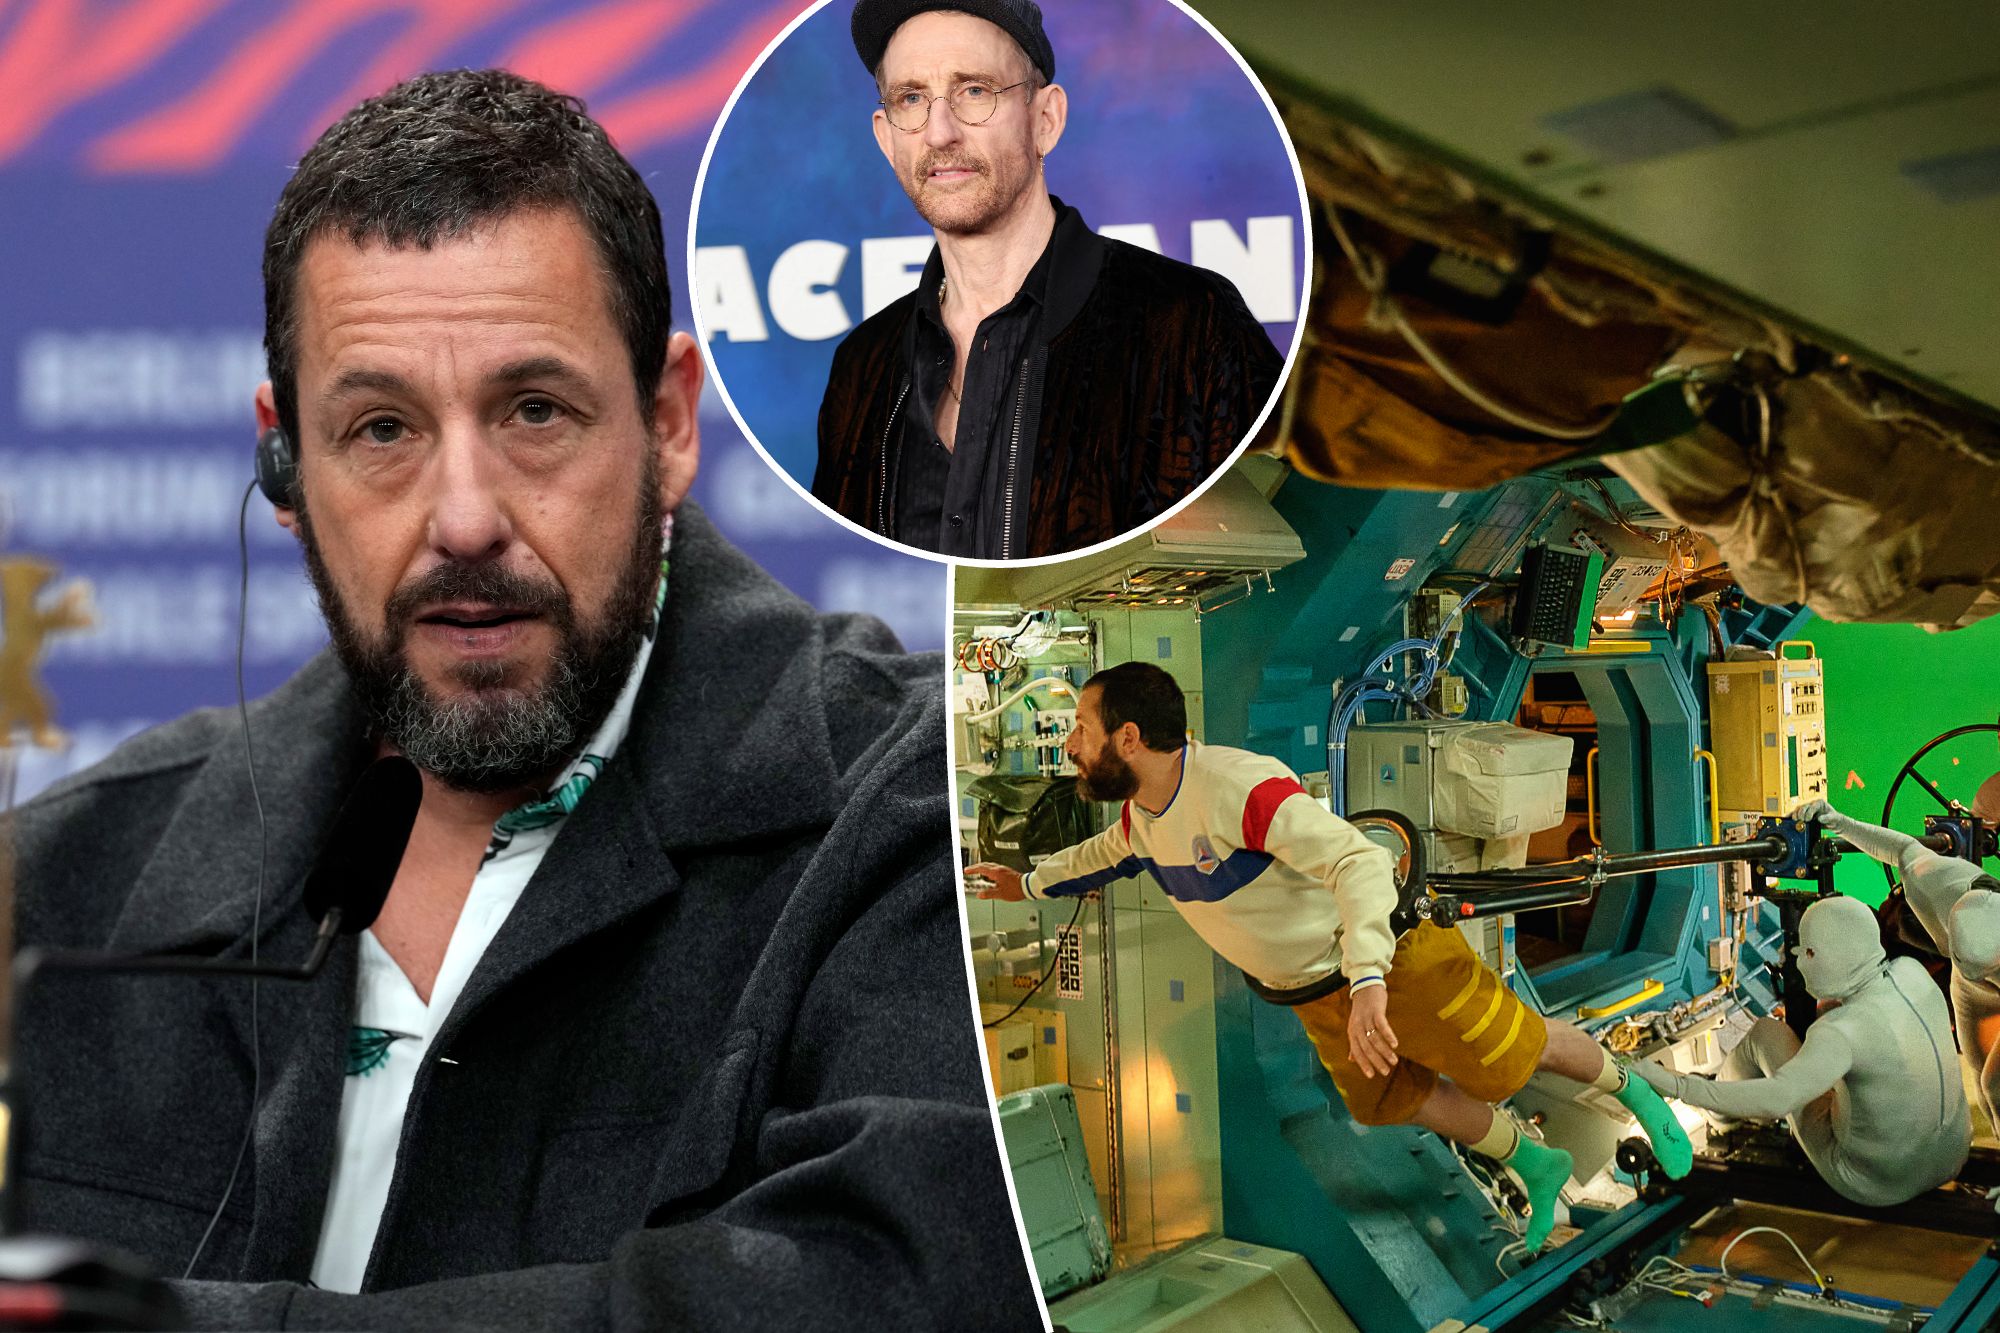 'Spaceman' director says Adam Sandler suffered ‘significant pain’ playing astronaut